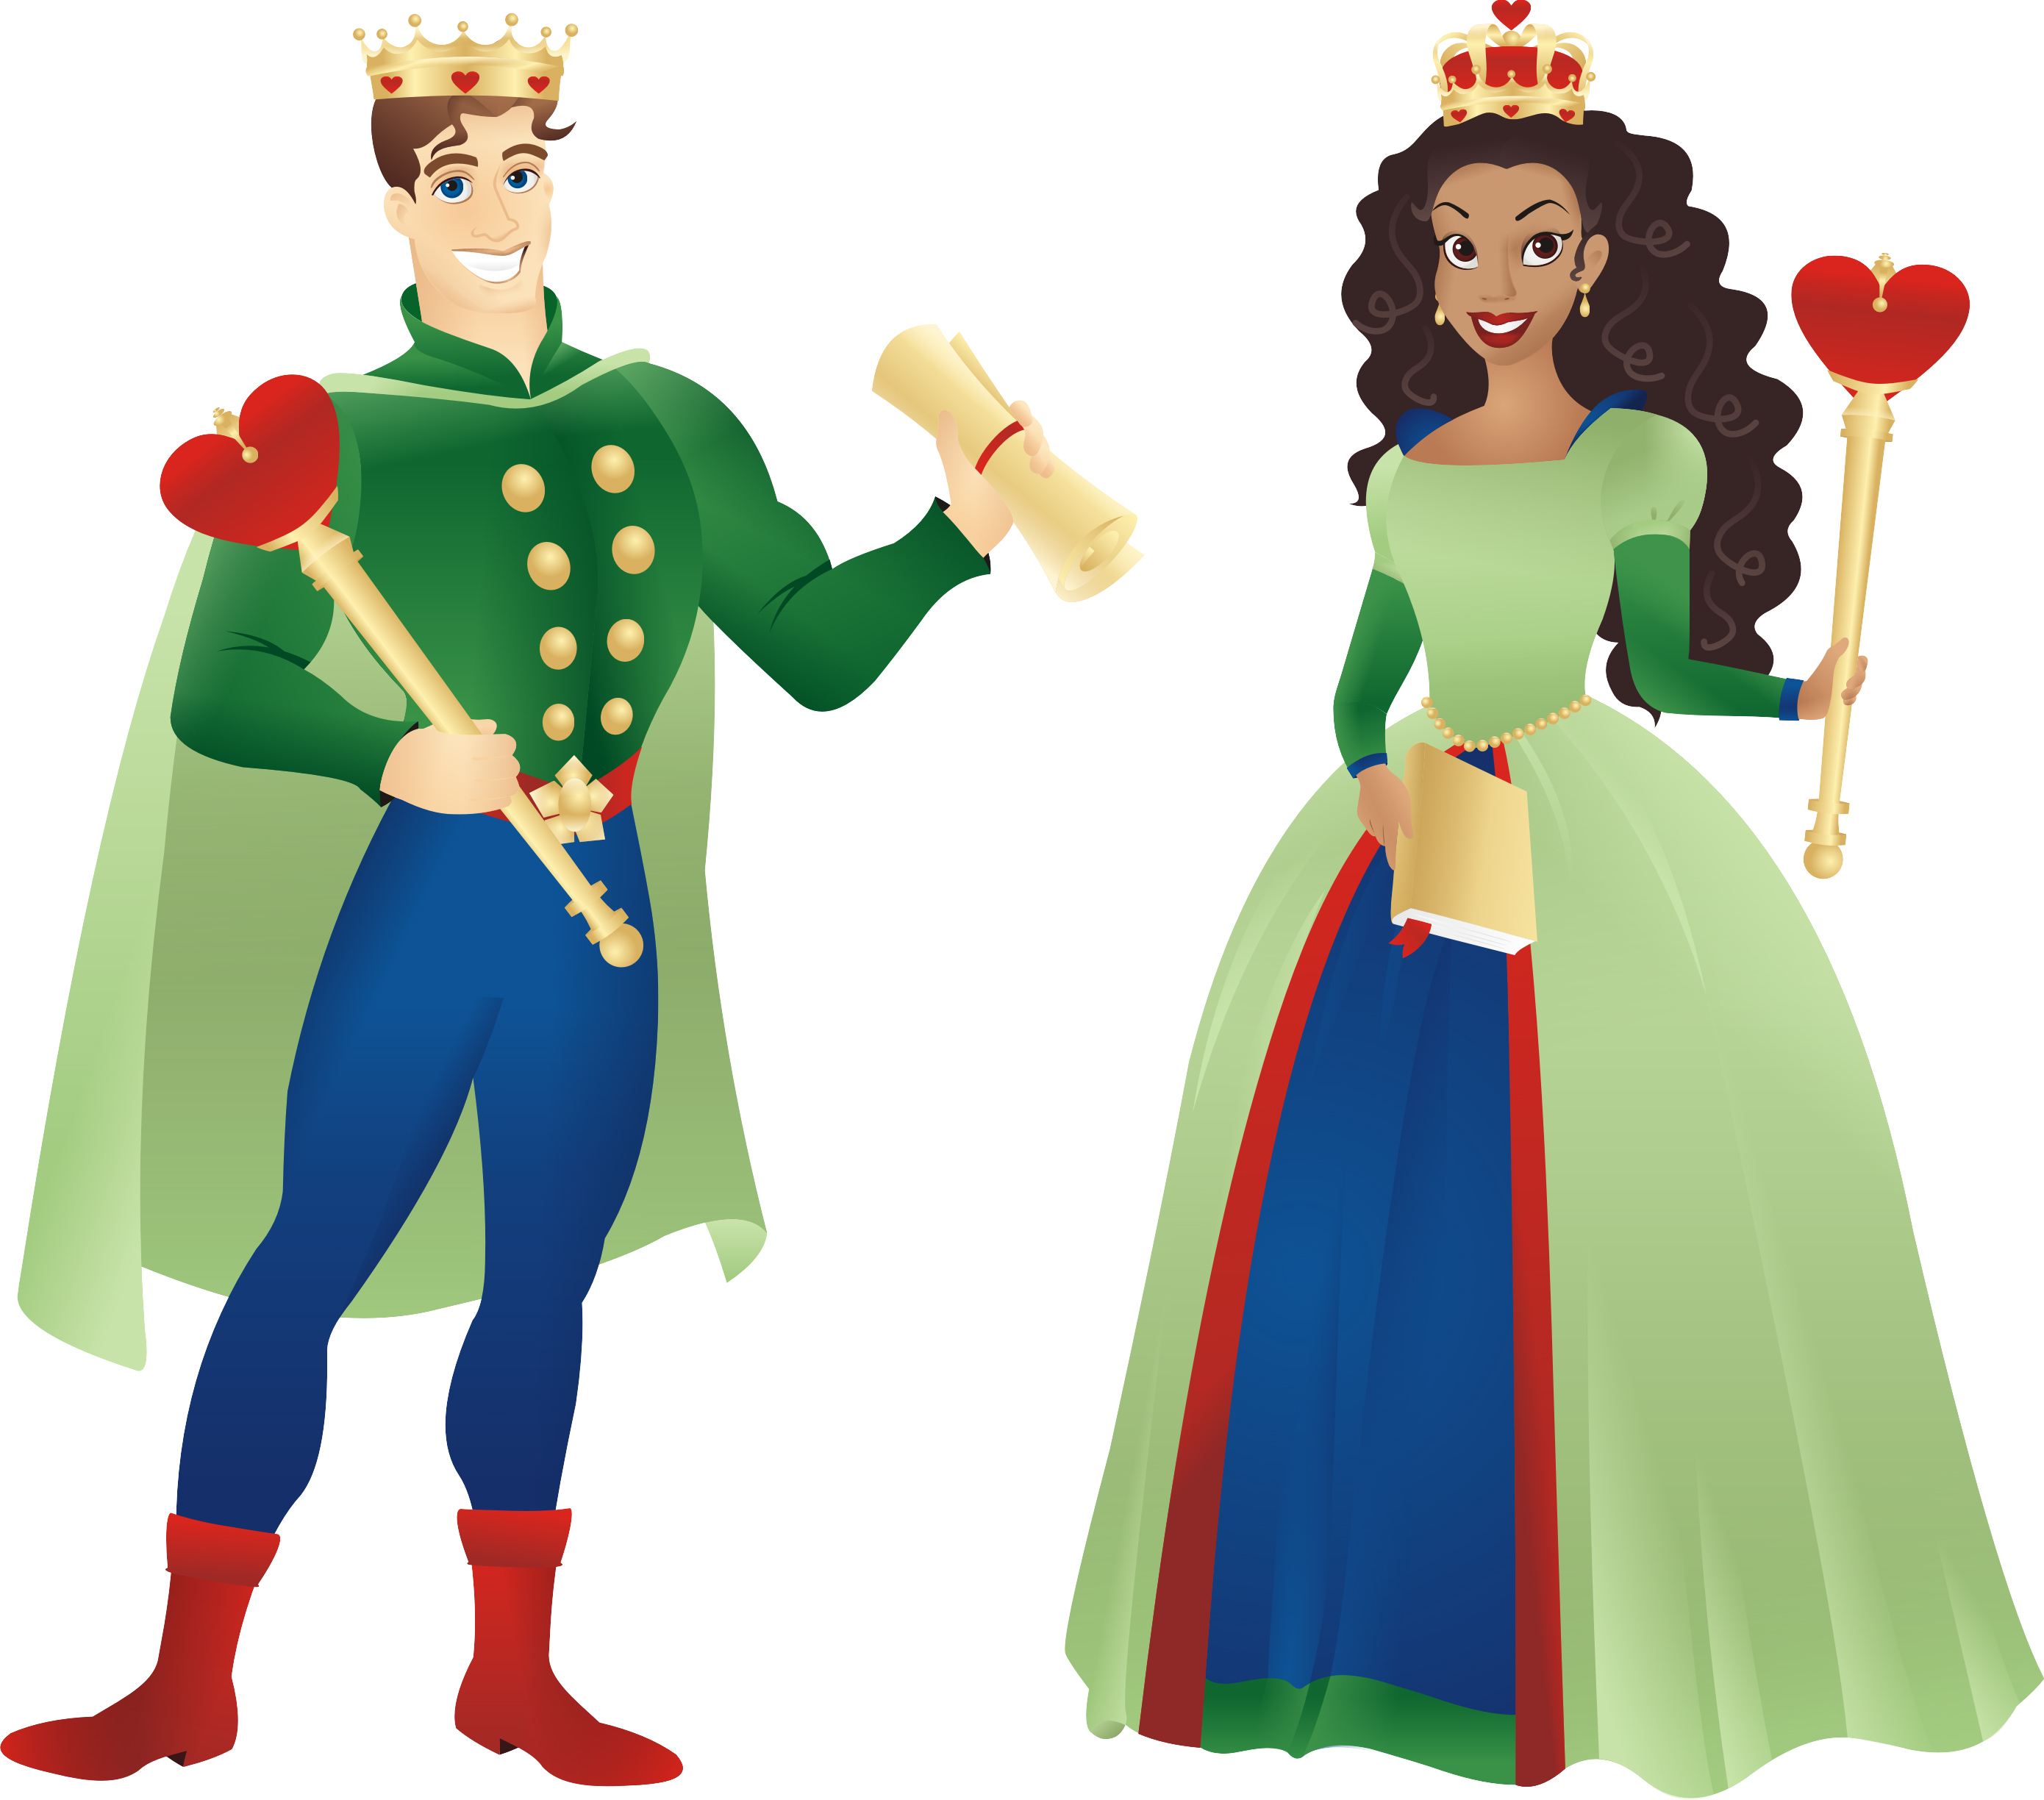 queen clipart images - photo #50